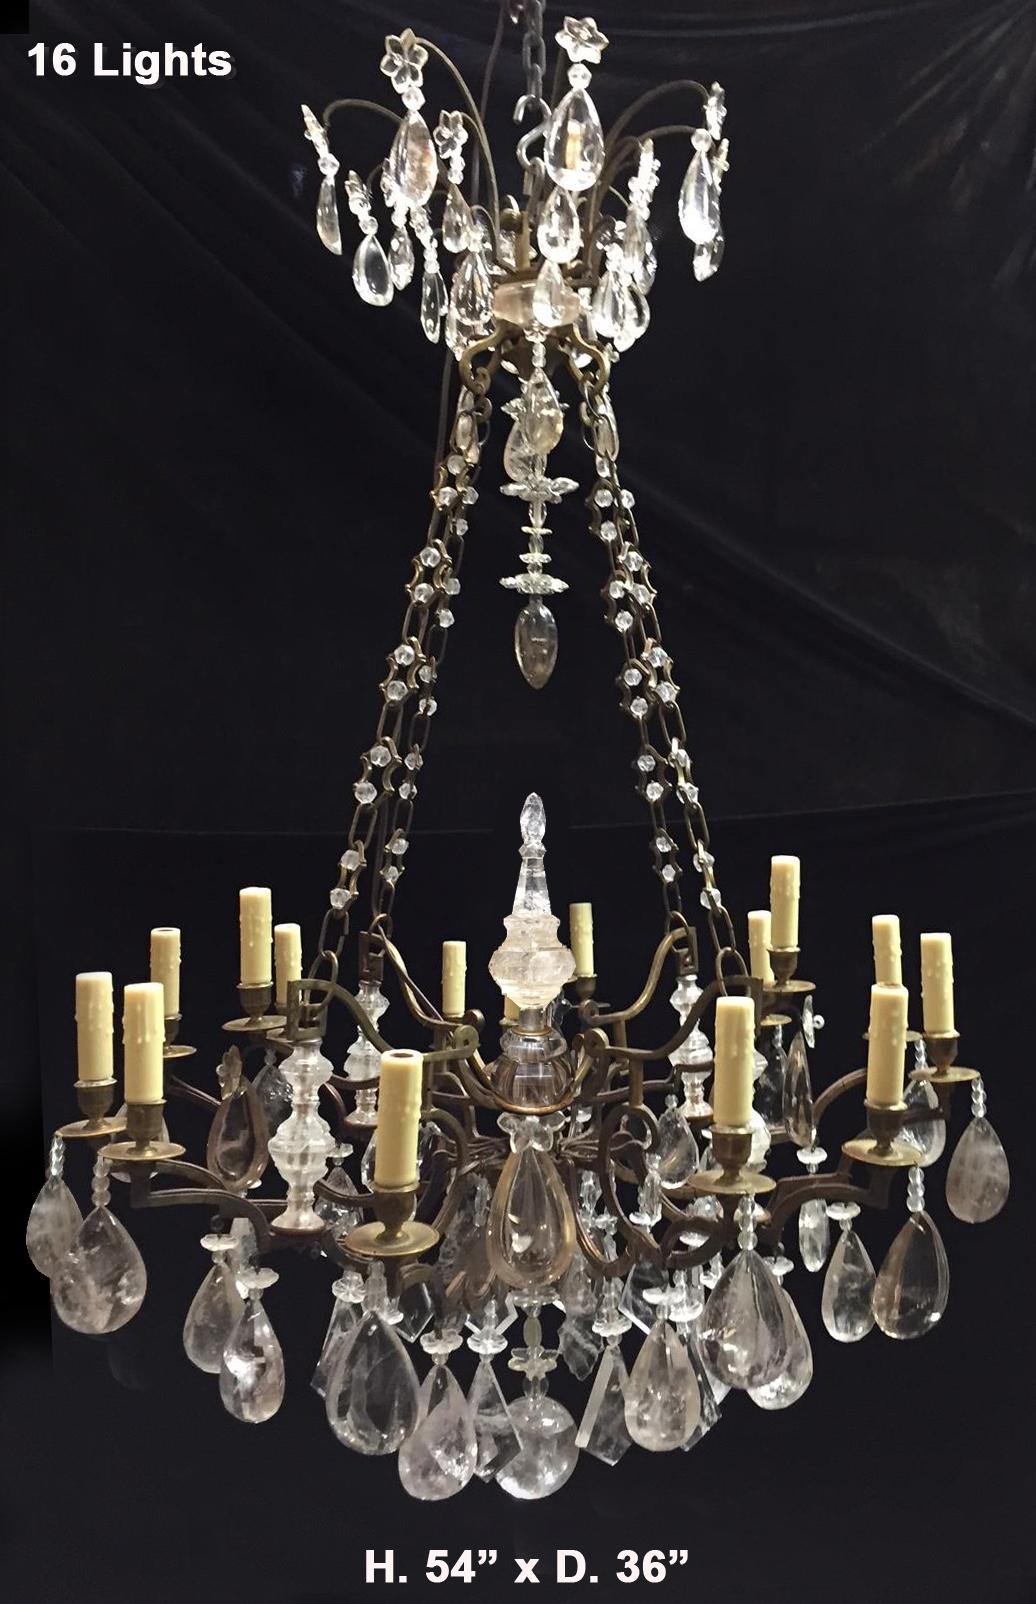 Impressive 19th century French hand-carved and hand-polished rock crystal and smokey rock crystal bronze two-tier sixteen-light chandelier with fabulous rock crystal spike in the center.
Beautifully finished bronze frame with sixteen curved arms